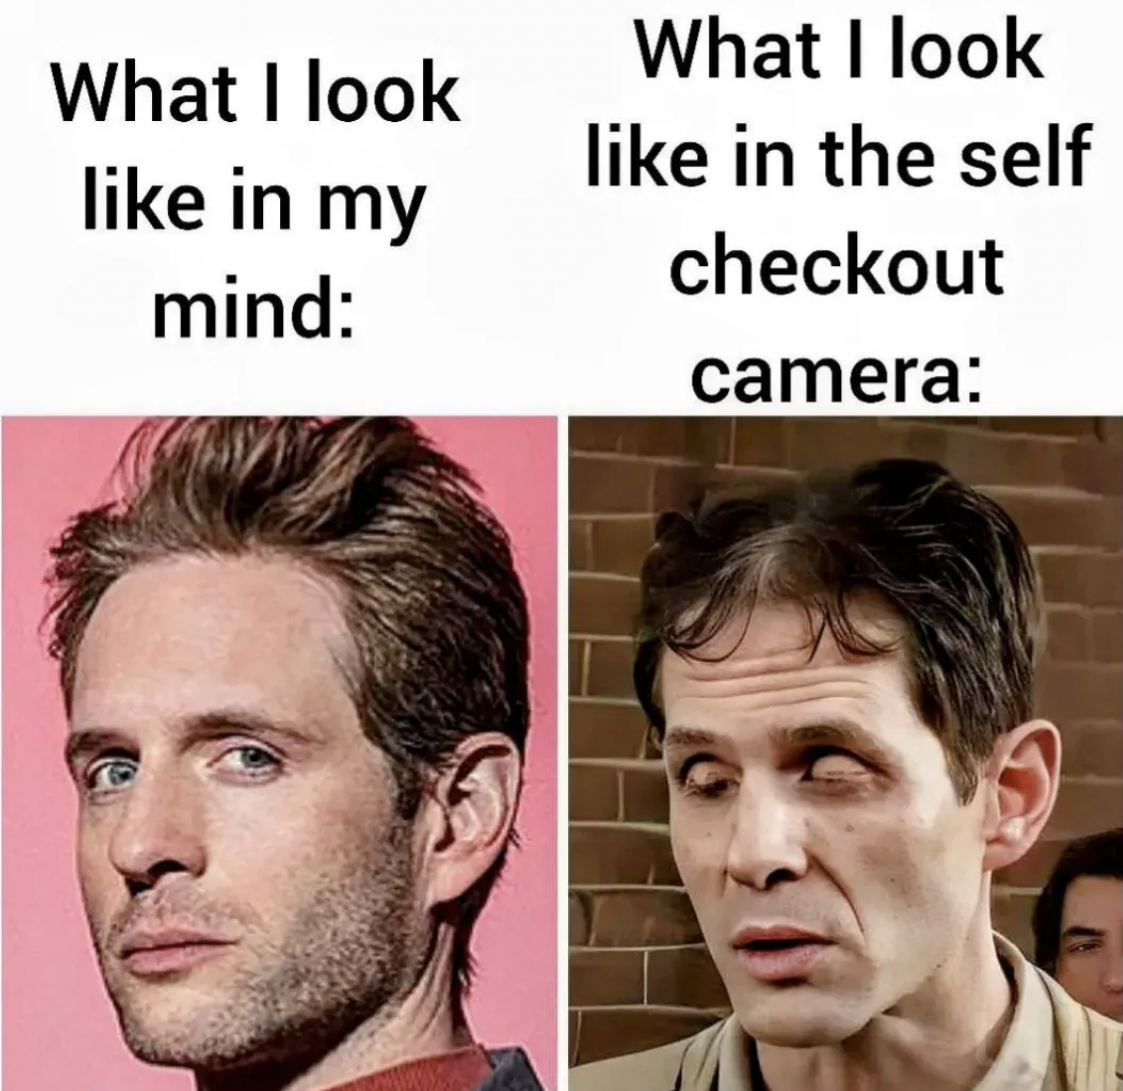 It's Always Sunny in Philadelphia memes - facial expression - What I look in my mind What I look in the self checkout camera